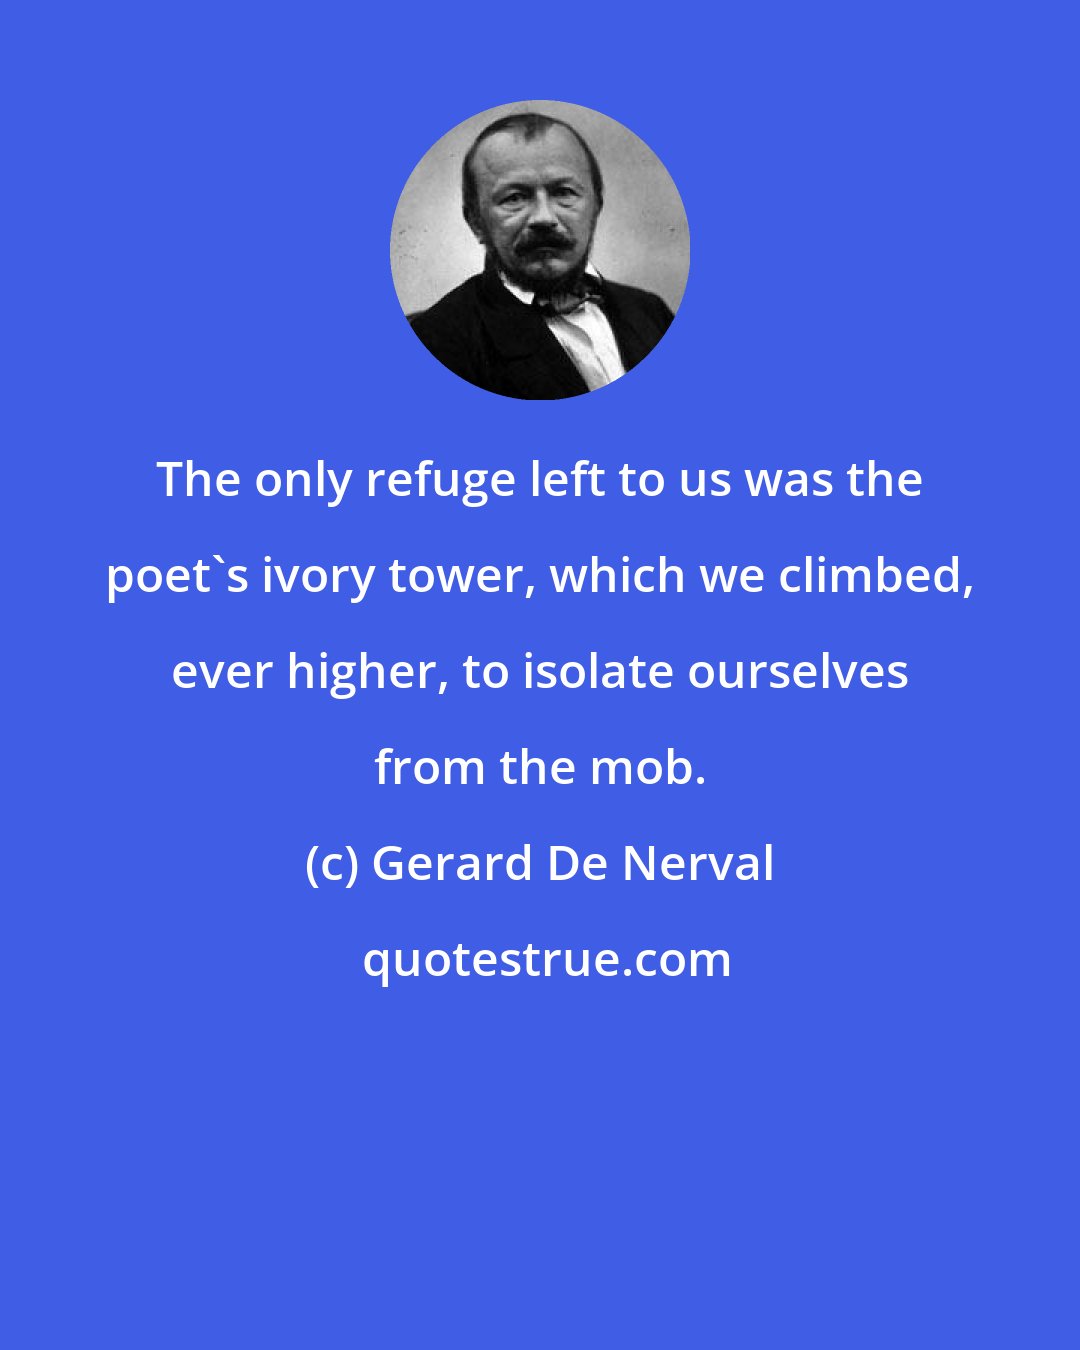 Gerard De Nerval: The only refuge left to us was the poet's ivory tower, which we climbed, ever higher, to isolate ourselves from the mob.